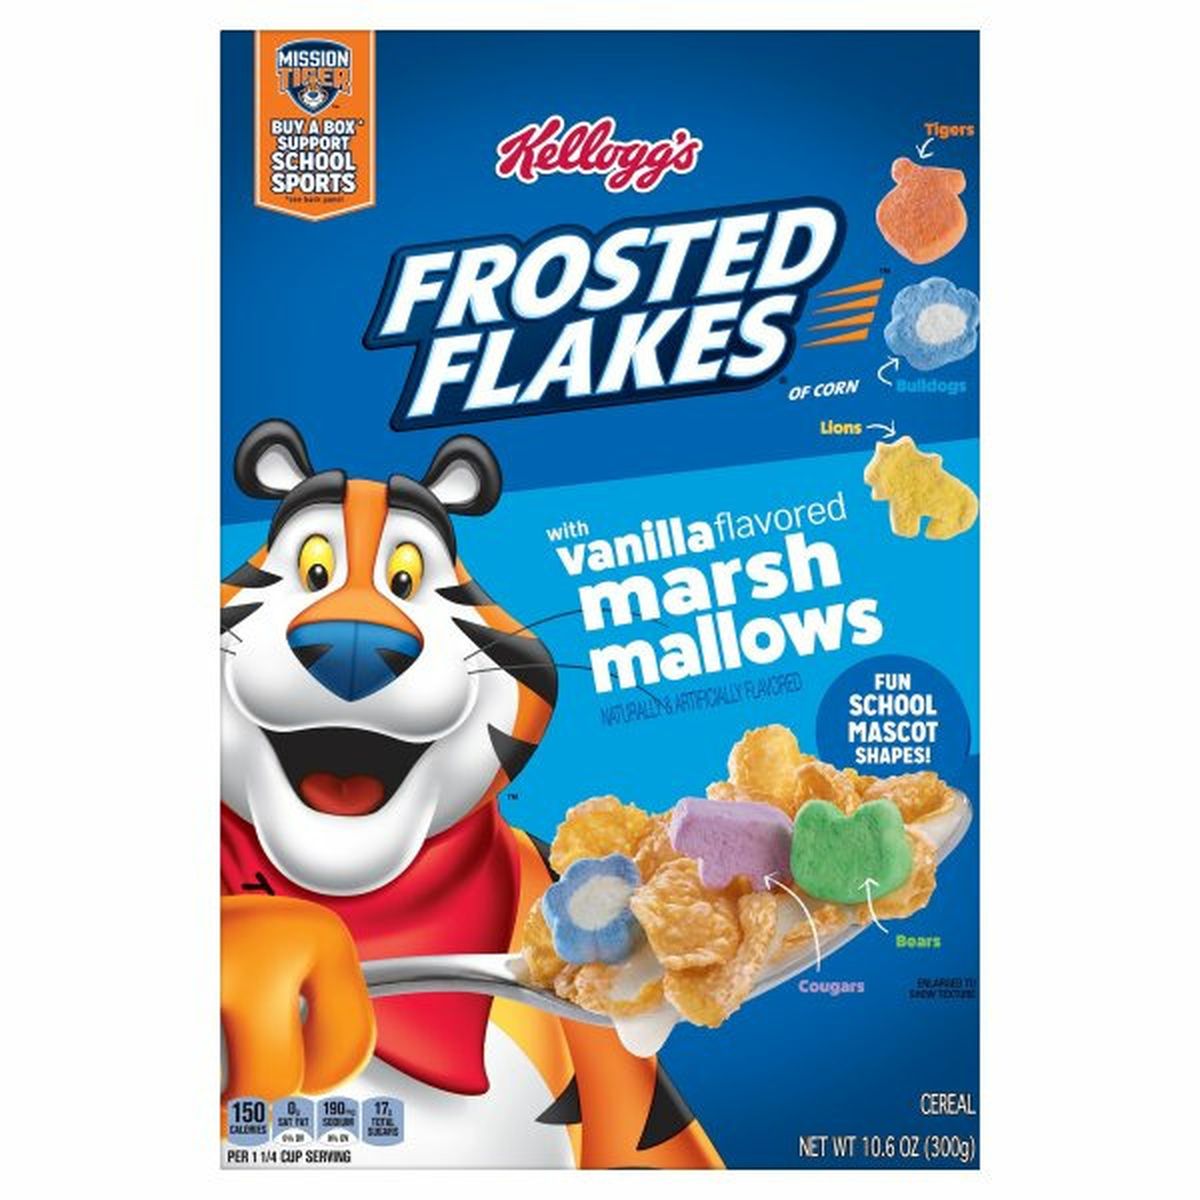 Calories in Kellogg's Frosted Flakes Cereal, with Vanilla Flavored Marshmallows